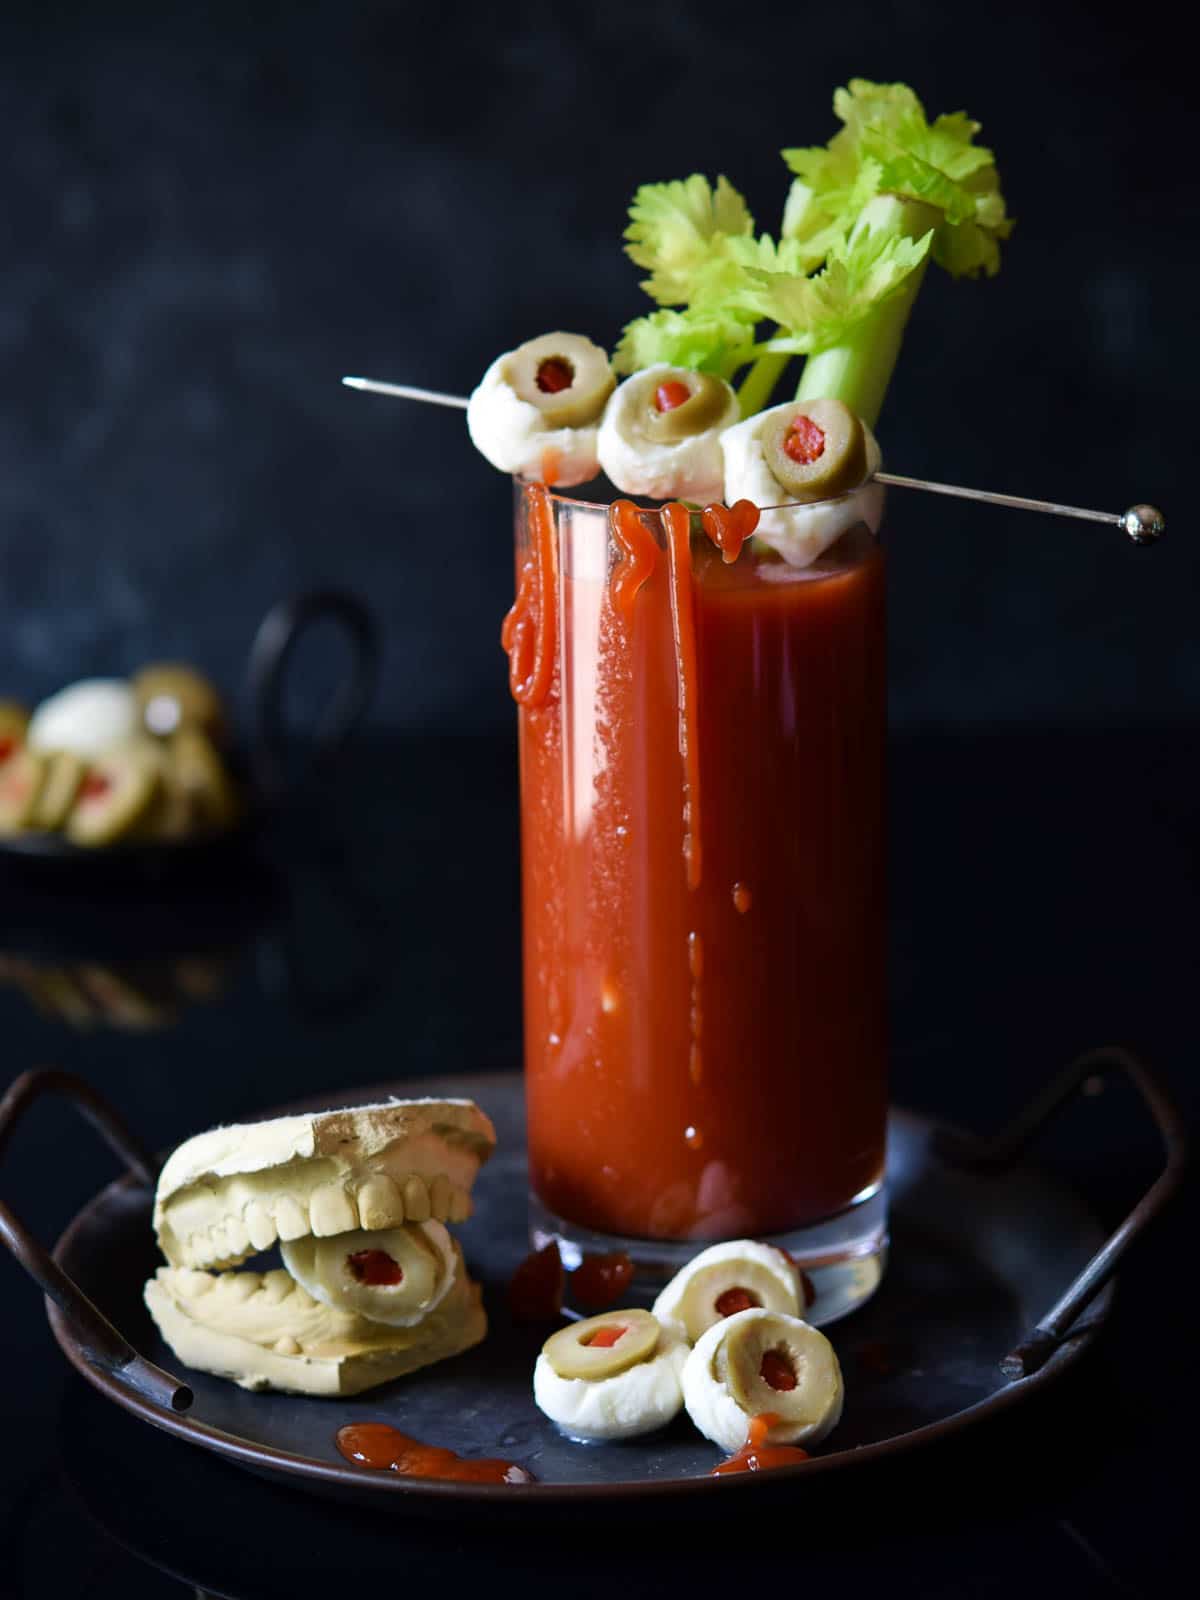 Bloody Mary with celery and mozzarella garnish on a black background.